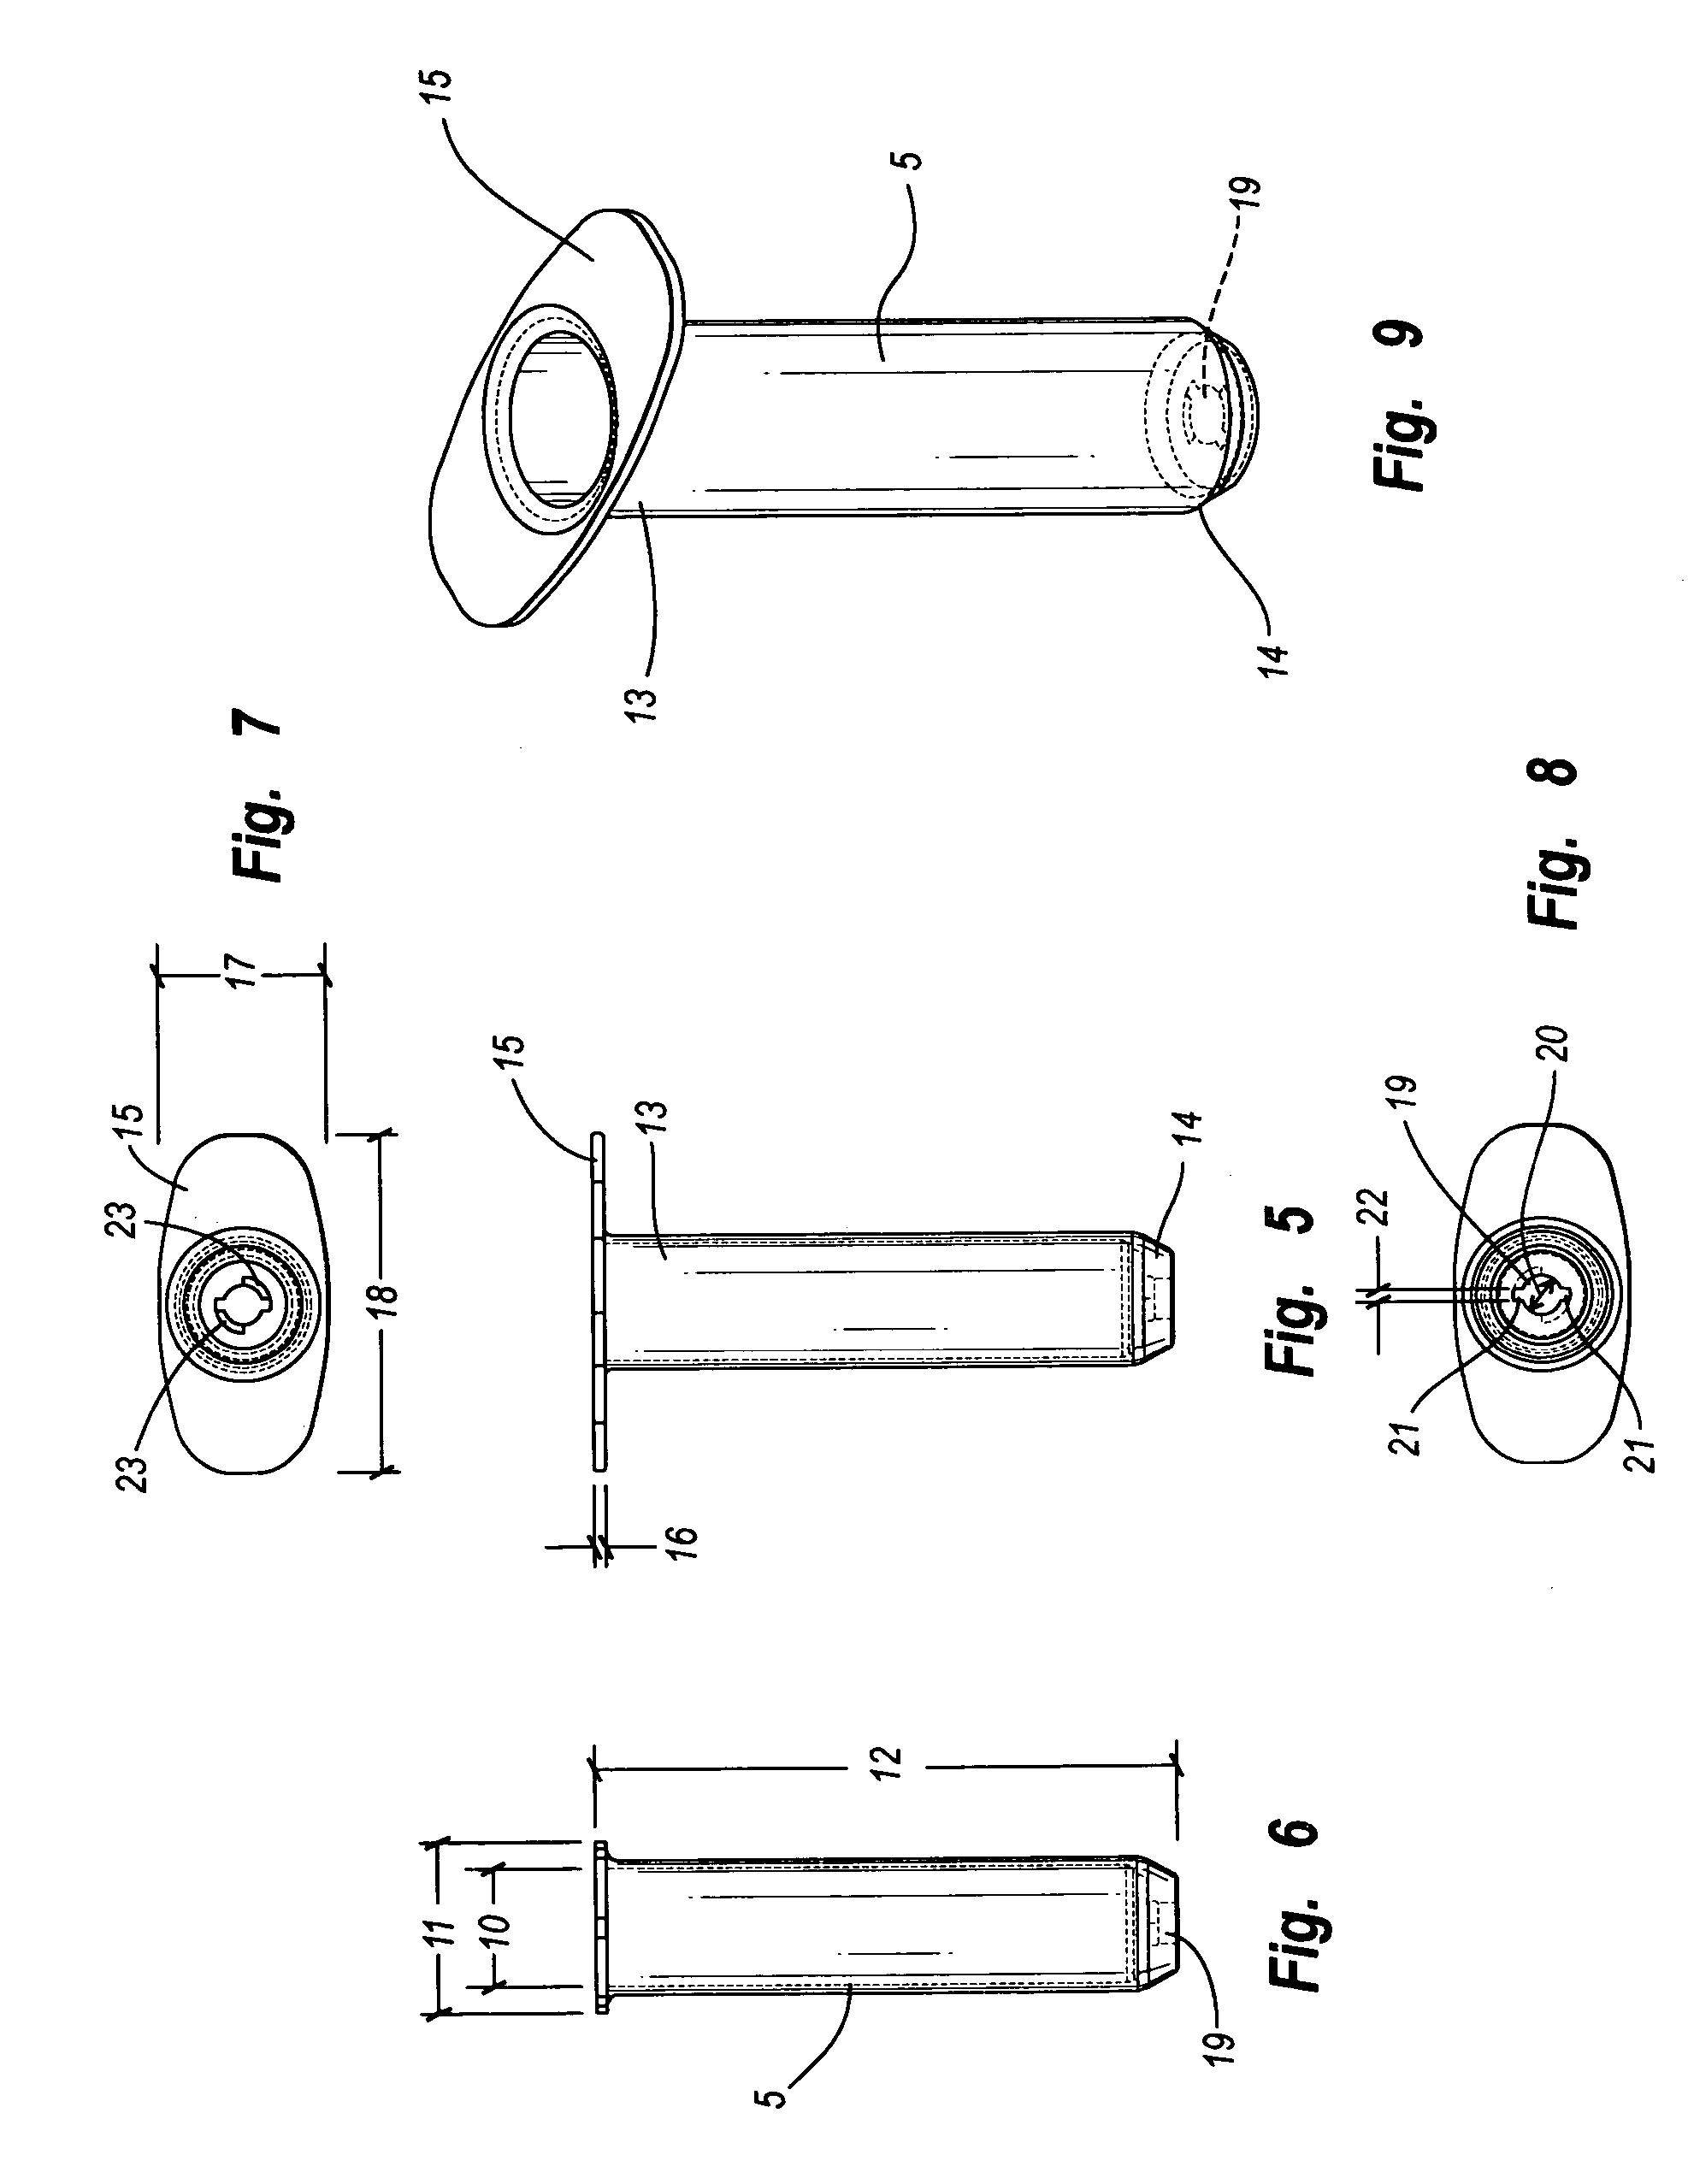 Cannulated injection system